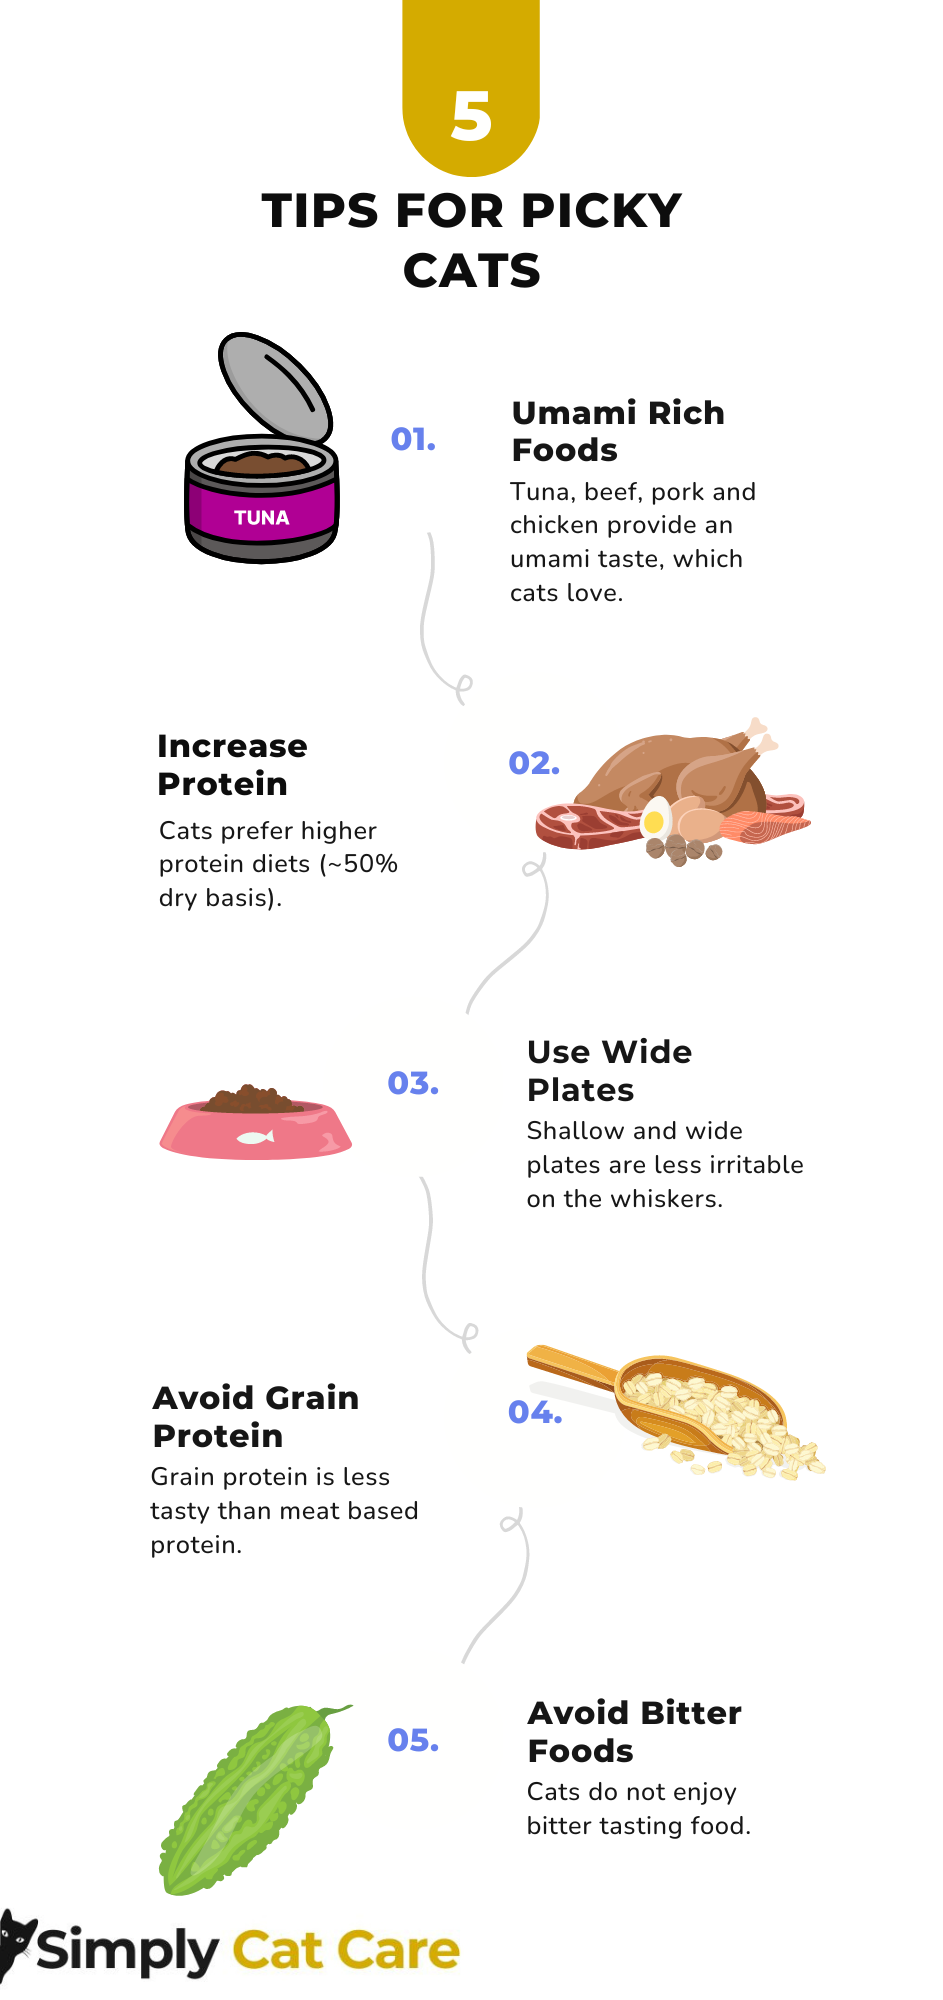 5 quick tips for picky cats infographic.